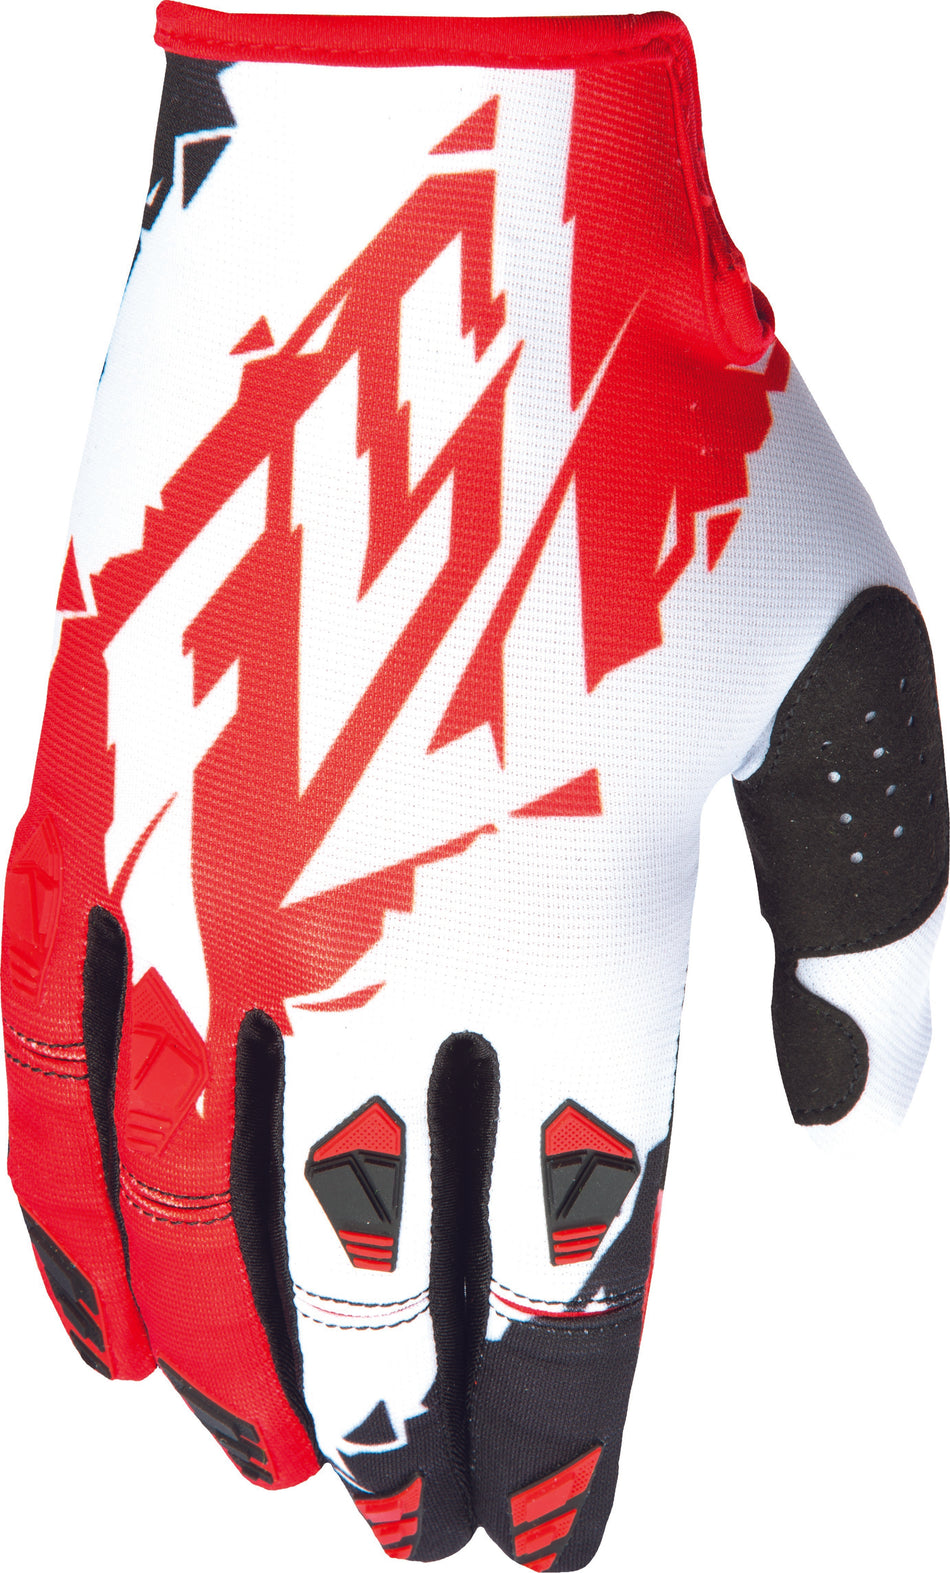 FLY RACING Kinetic Glove Red/White Sz 4 Ys 370-41404